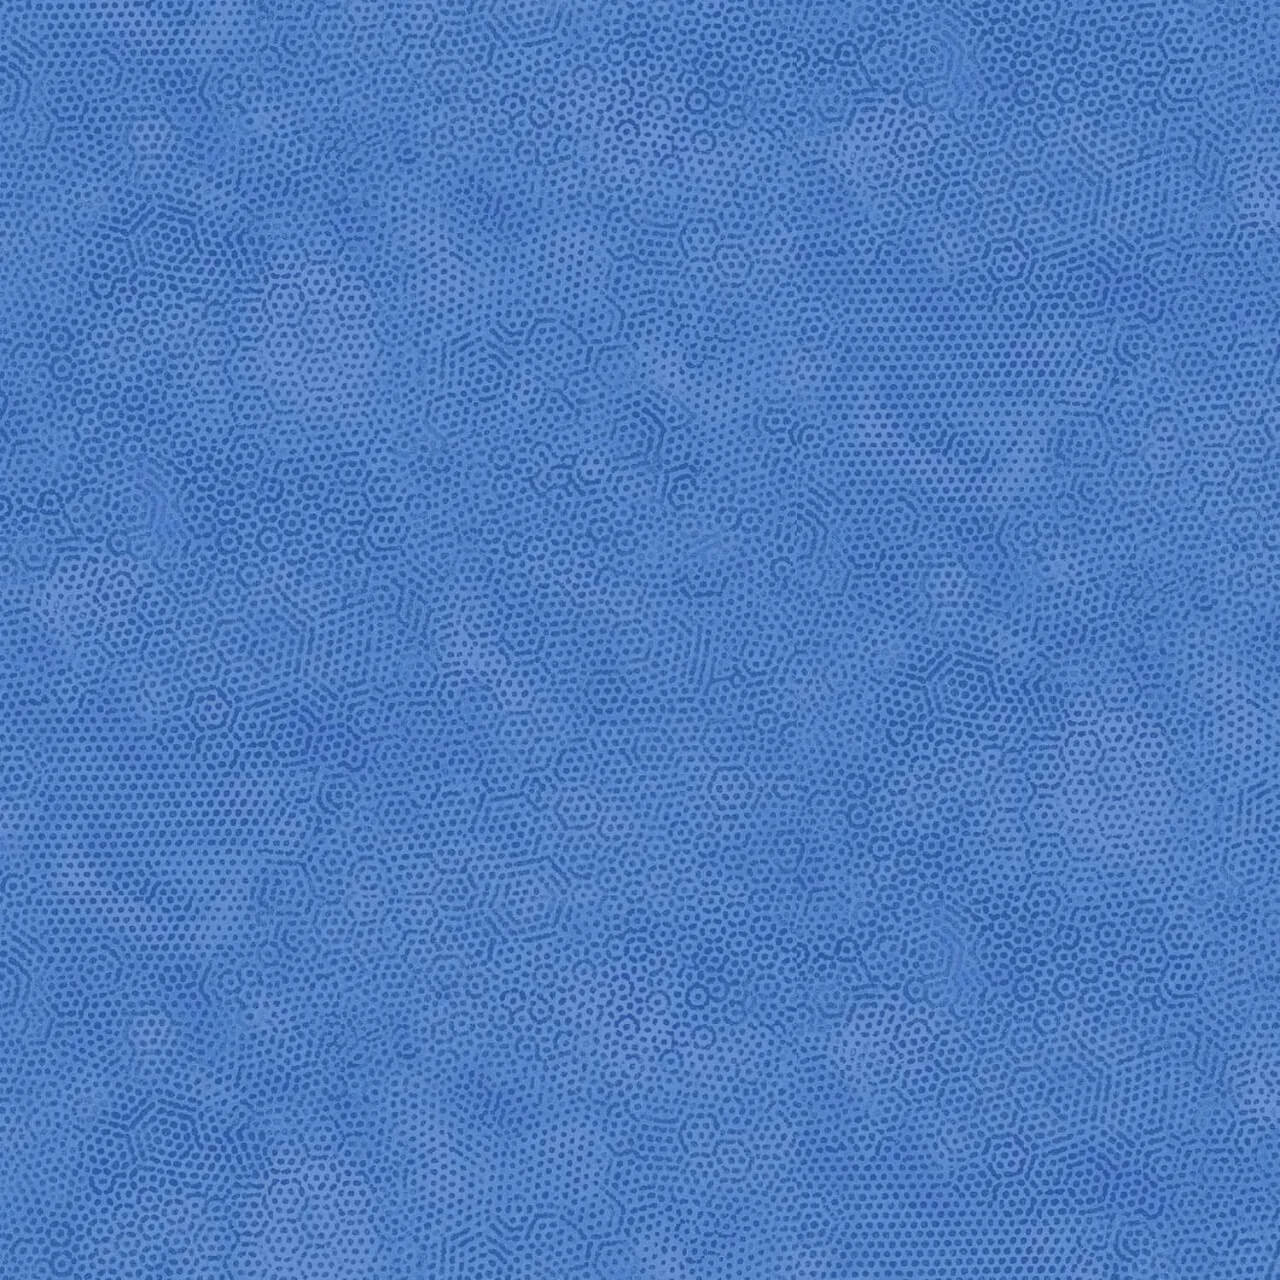 Andover Fabrics' "Dimples Cornflower" fabric, showcasing a beautiful blue tone-on-tone dimple texture.